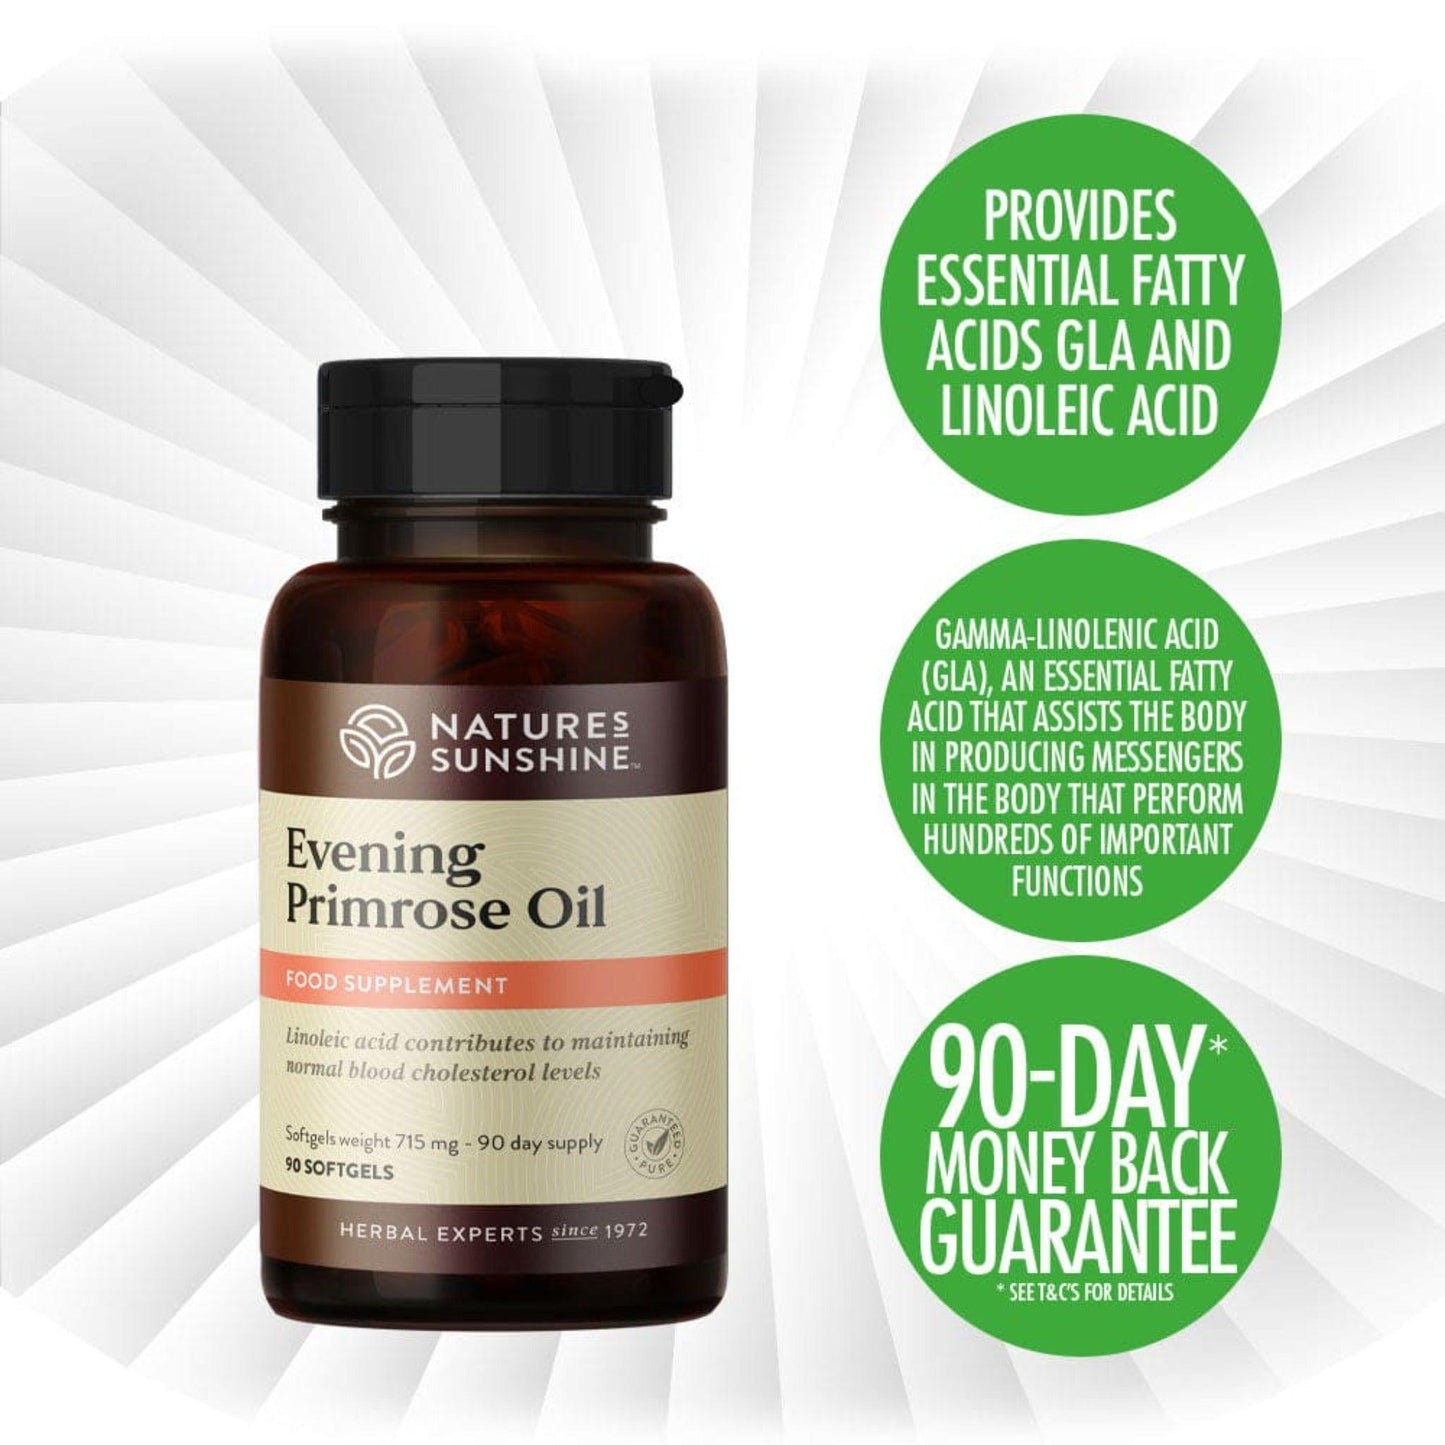 Evening Primrose Oil facts and benefits